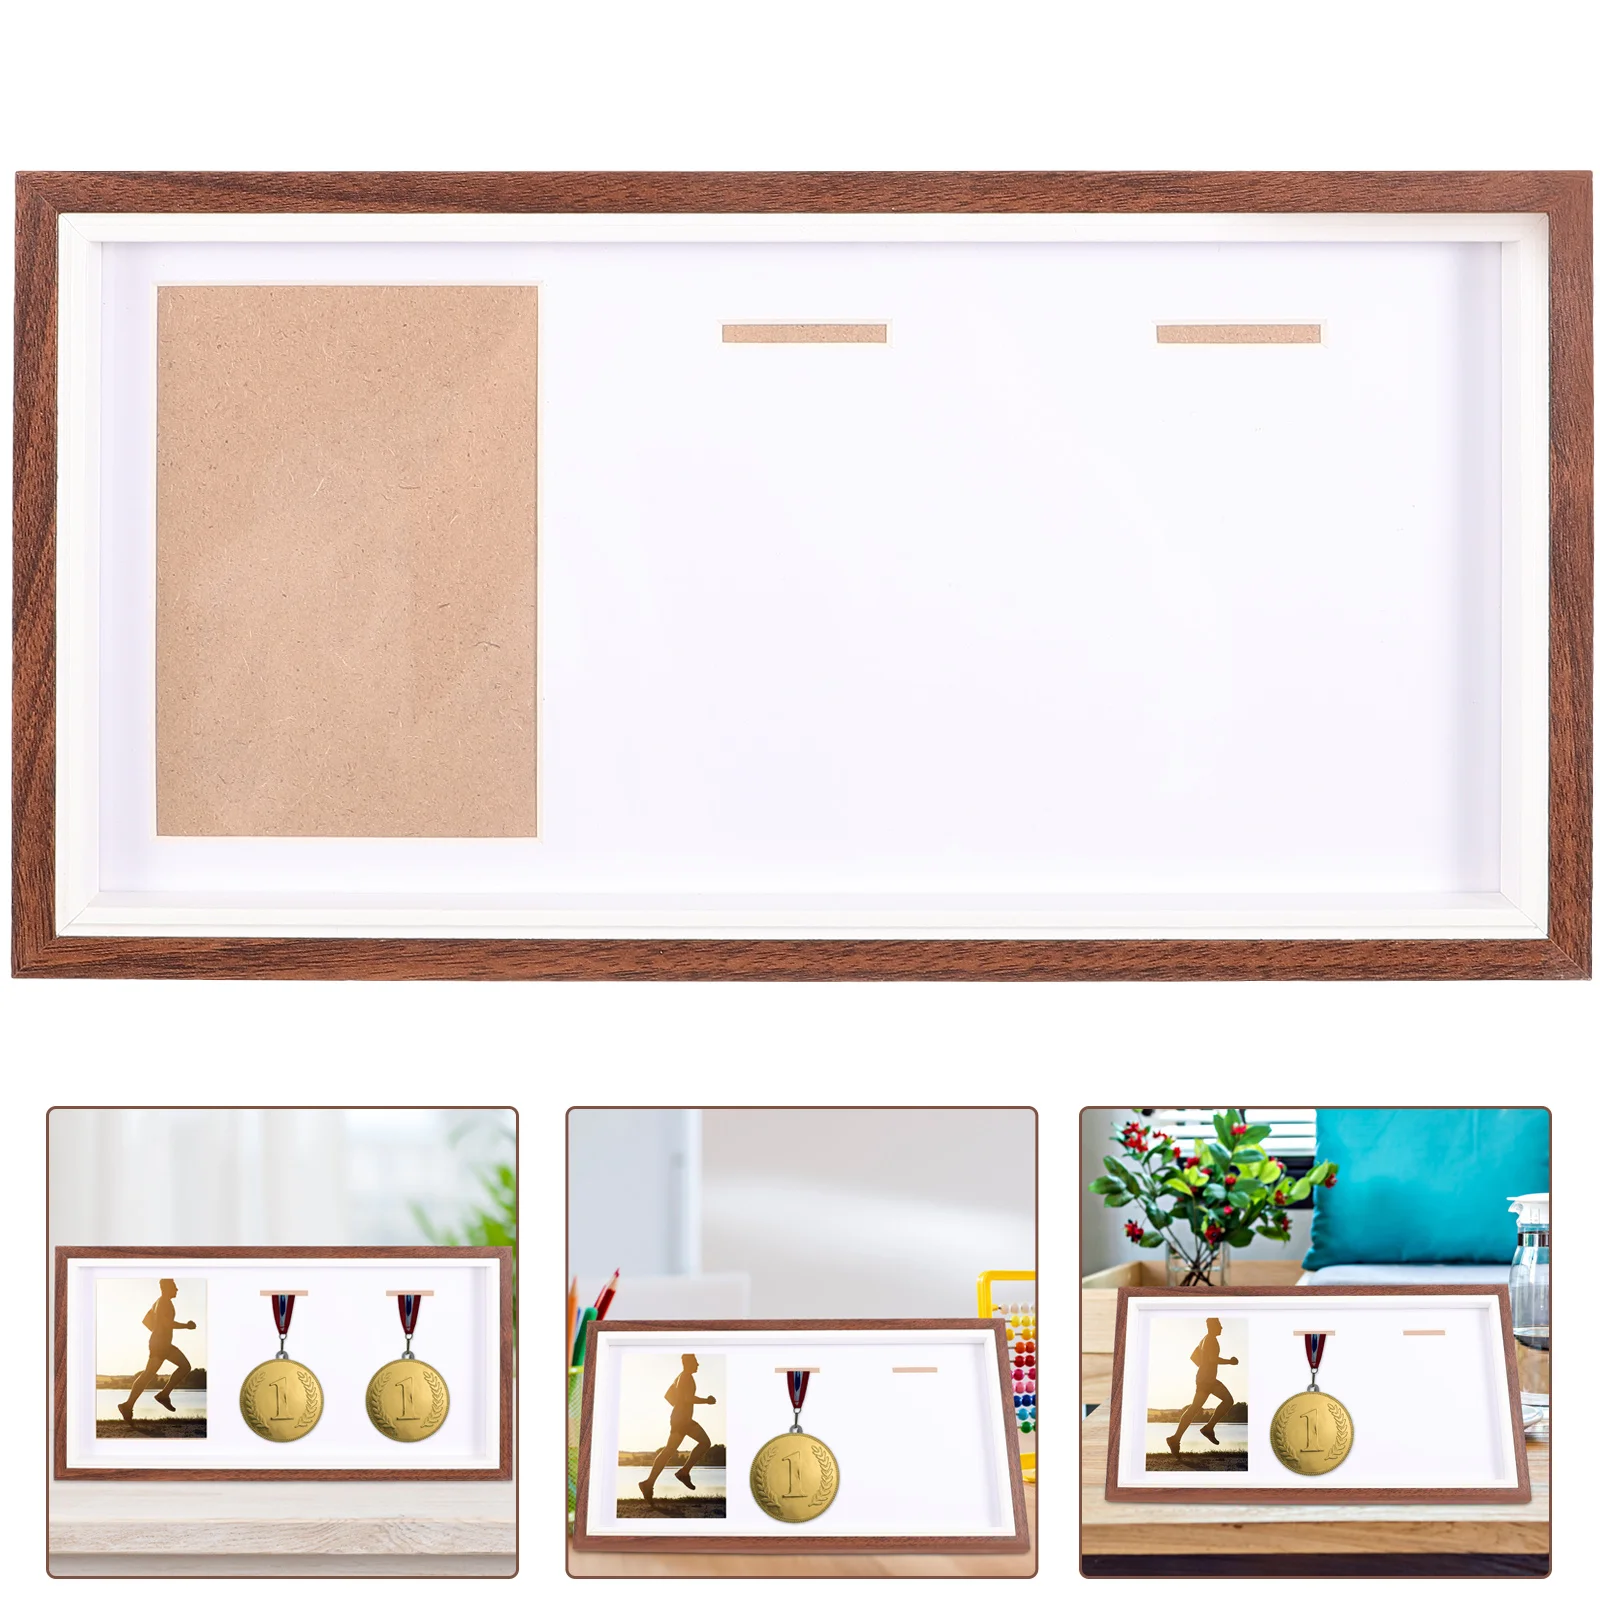 

Multi-functional Medal Display Frame Race Honor Medal Display Box Clear Picture Display Holder